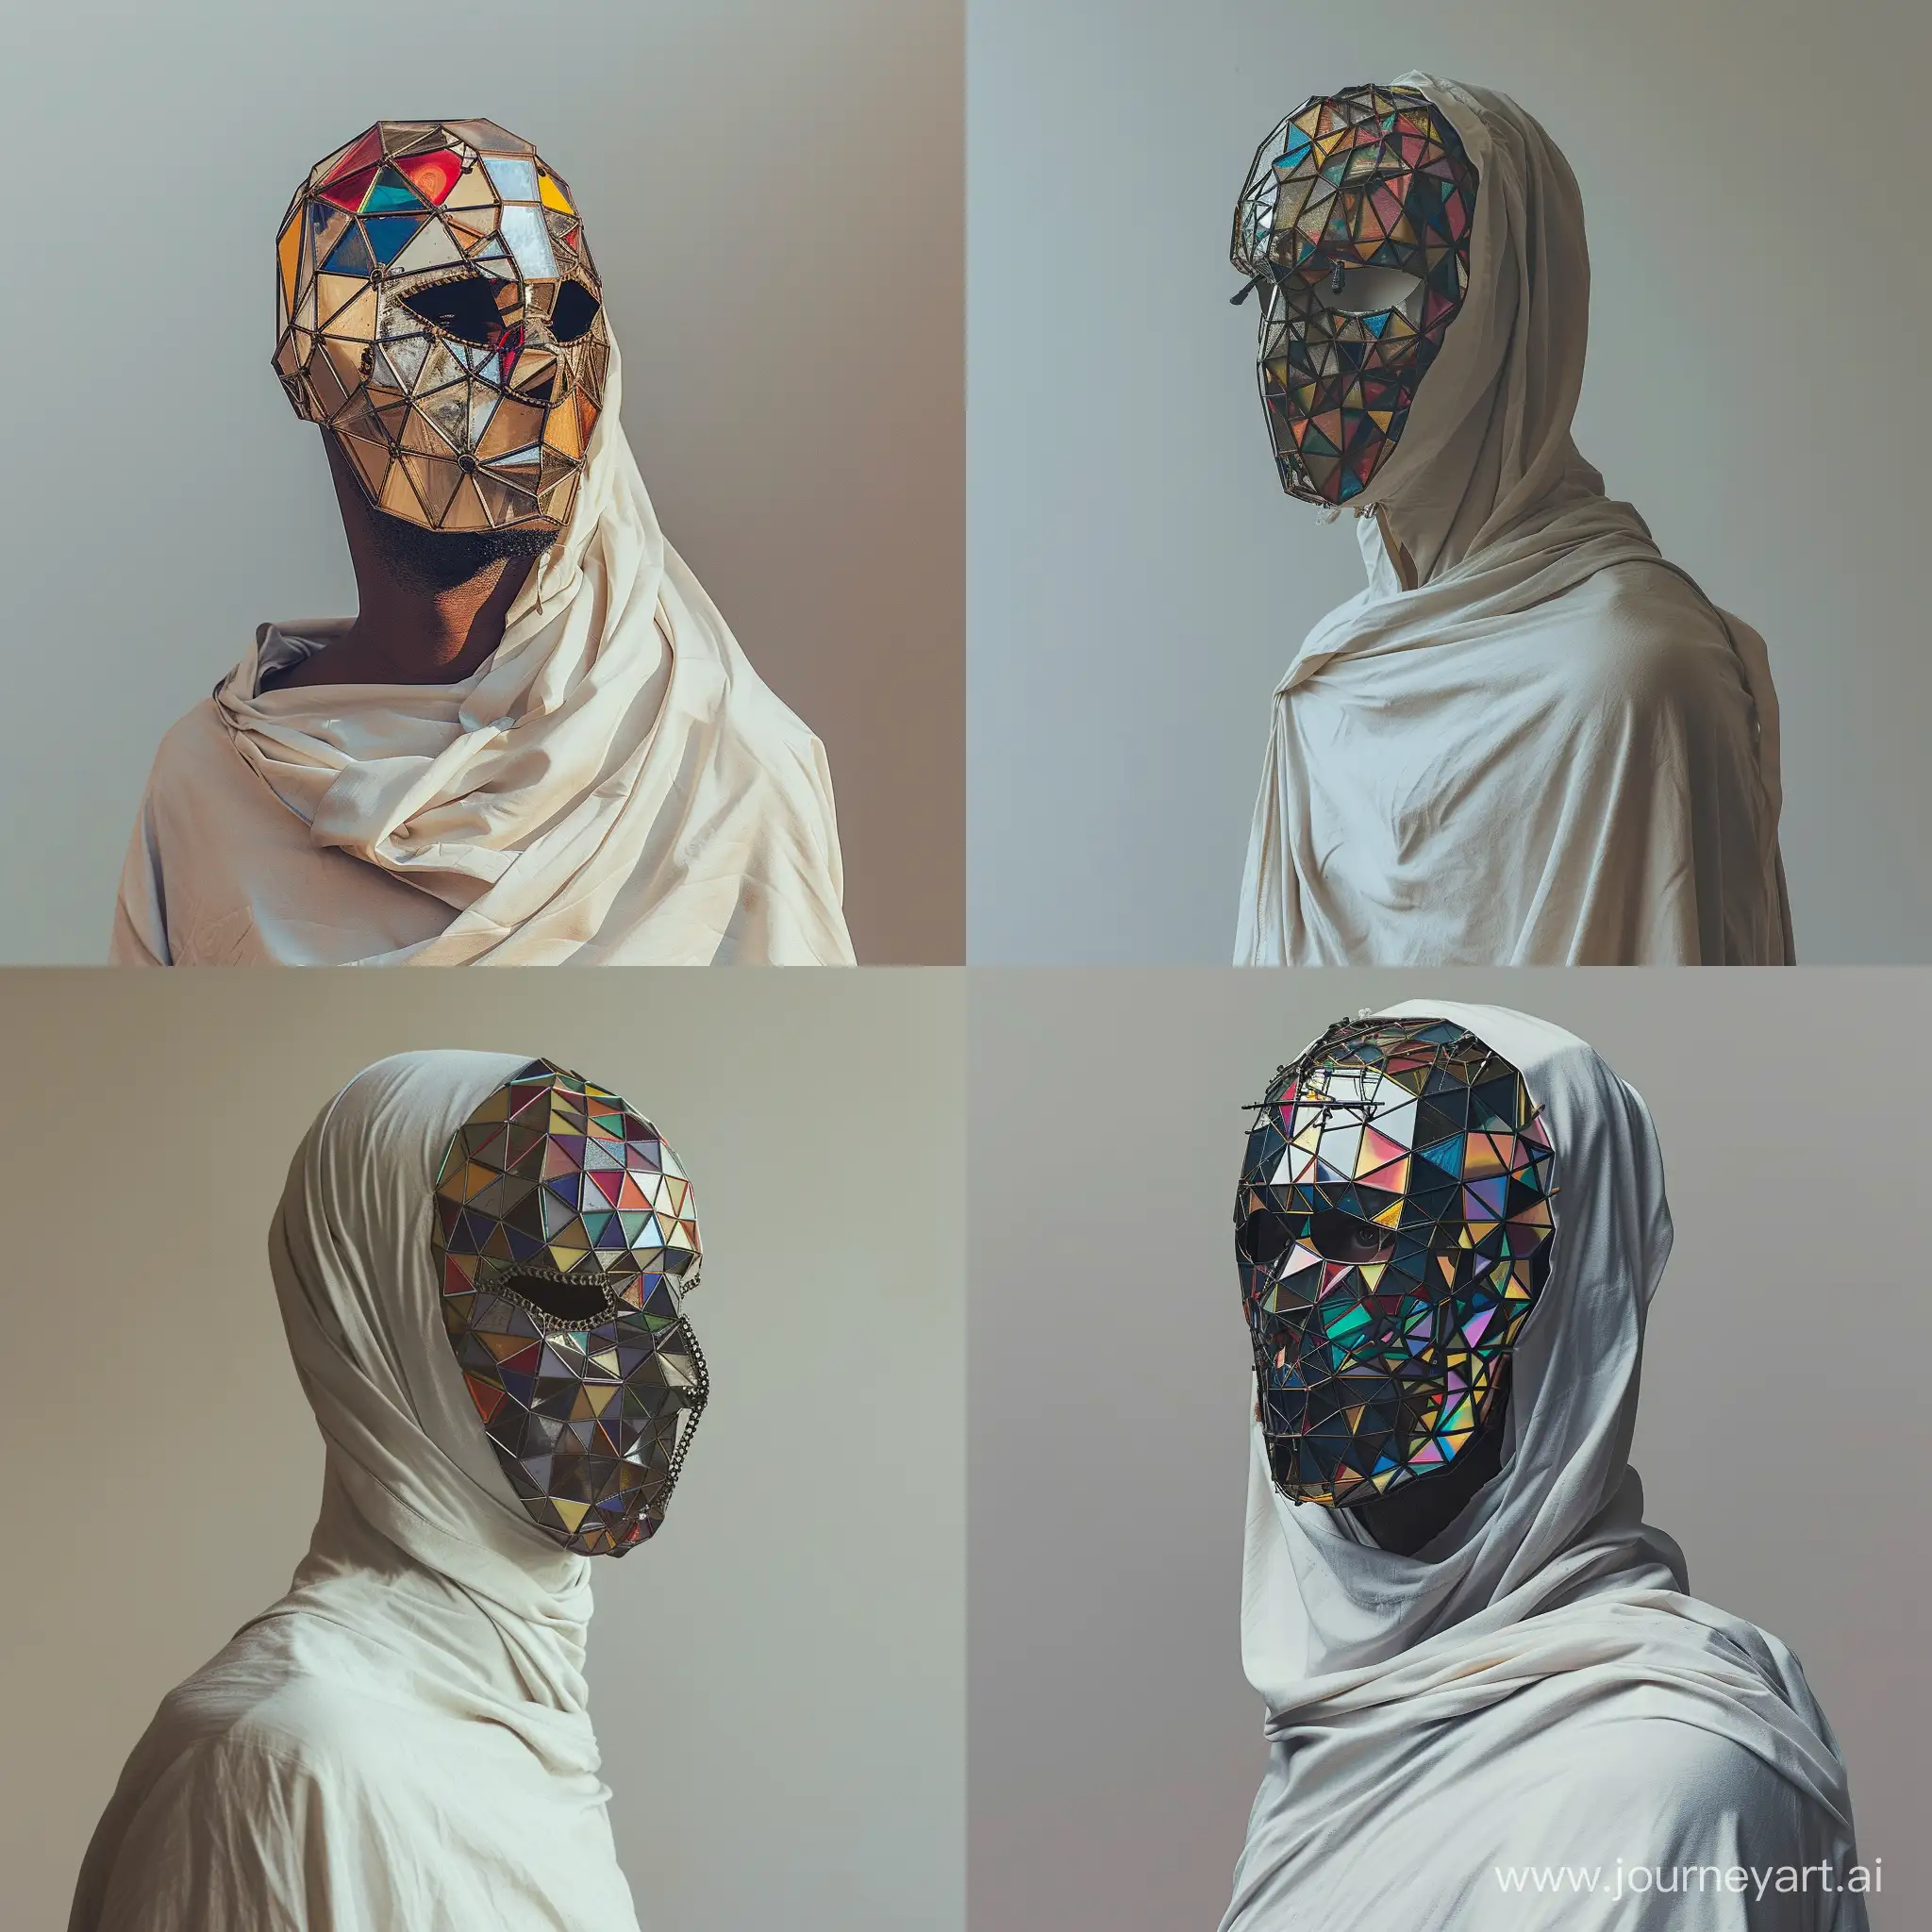 The man is standing in a mask that covers his whole face, the mask is multicolored with geometric pattern made with glass and iron and with many details  man is wearing a white sheet, the background is one colour, the photo is extra detailed